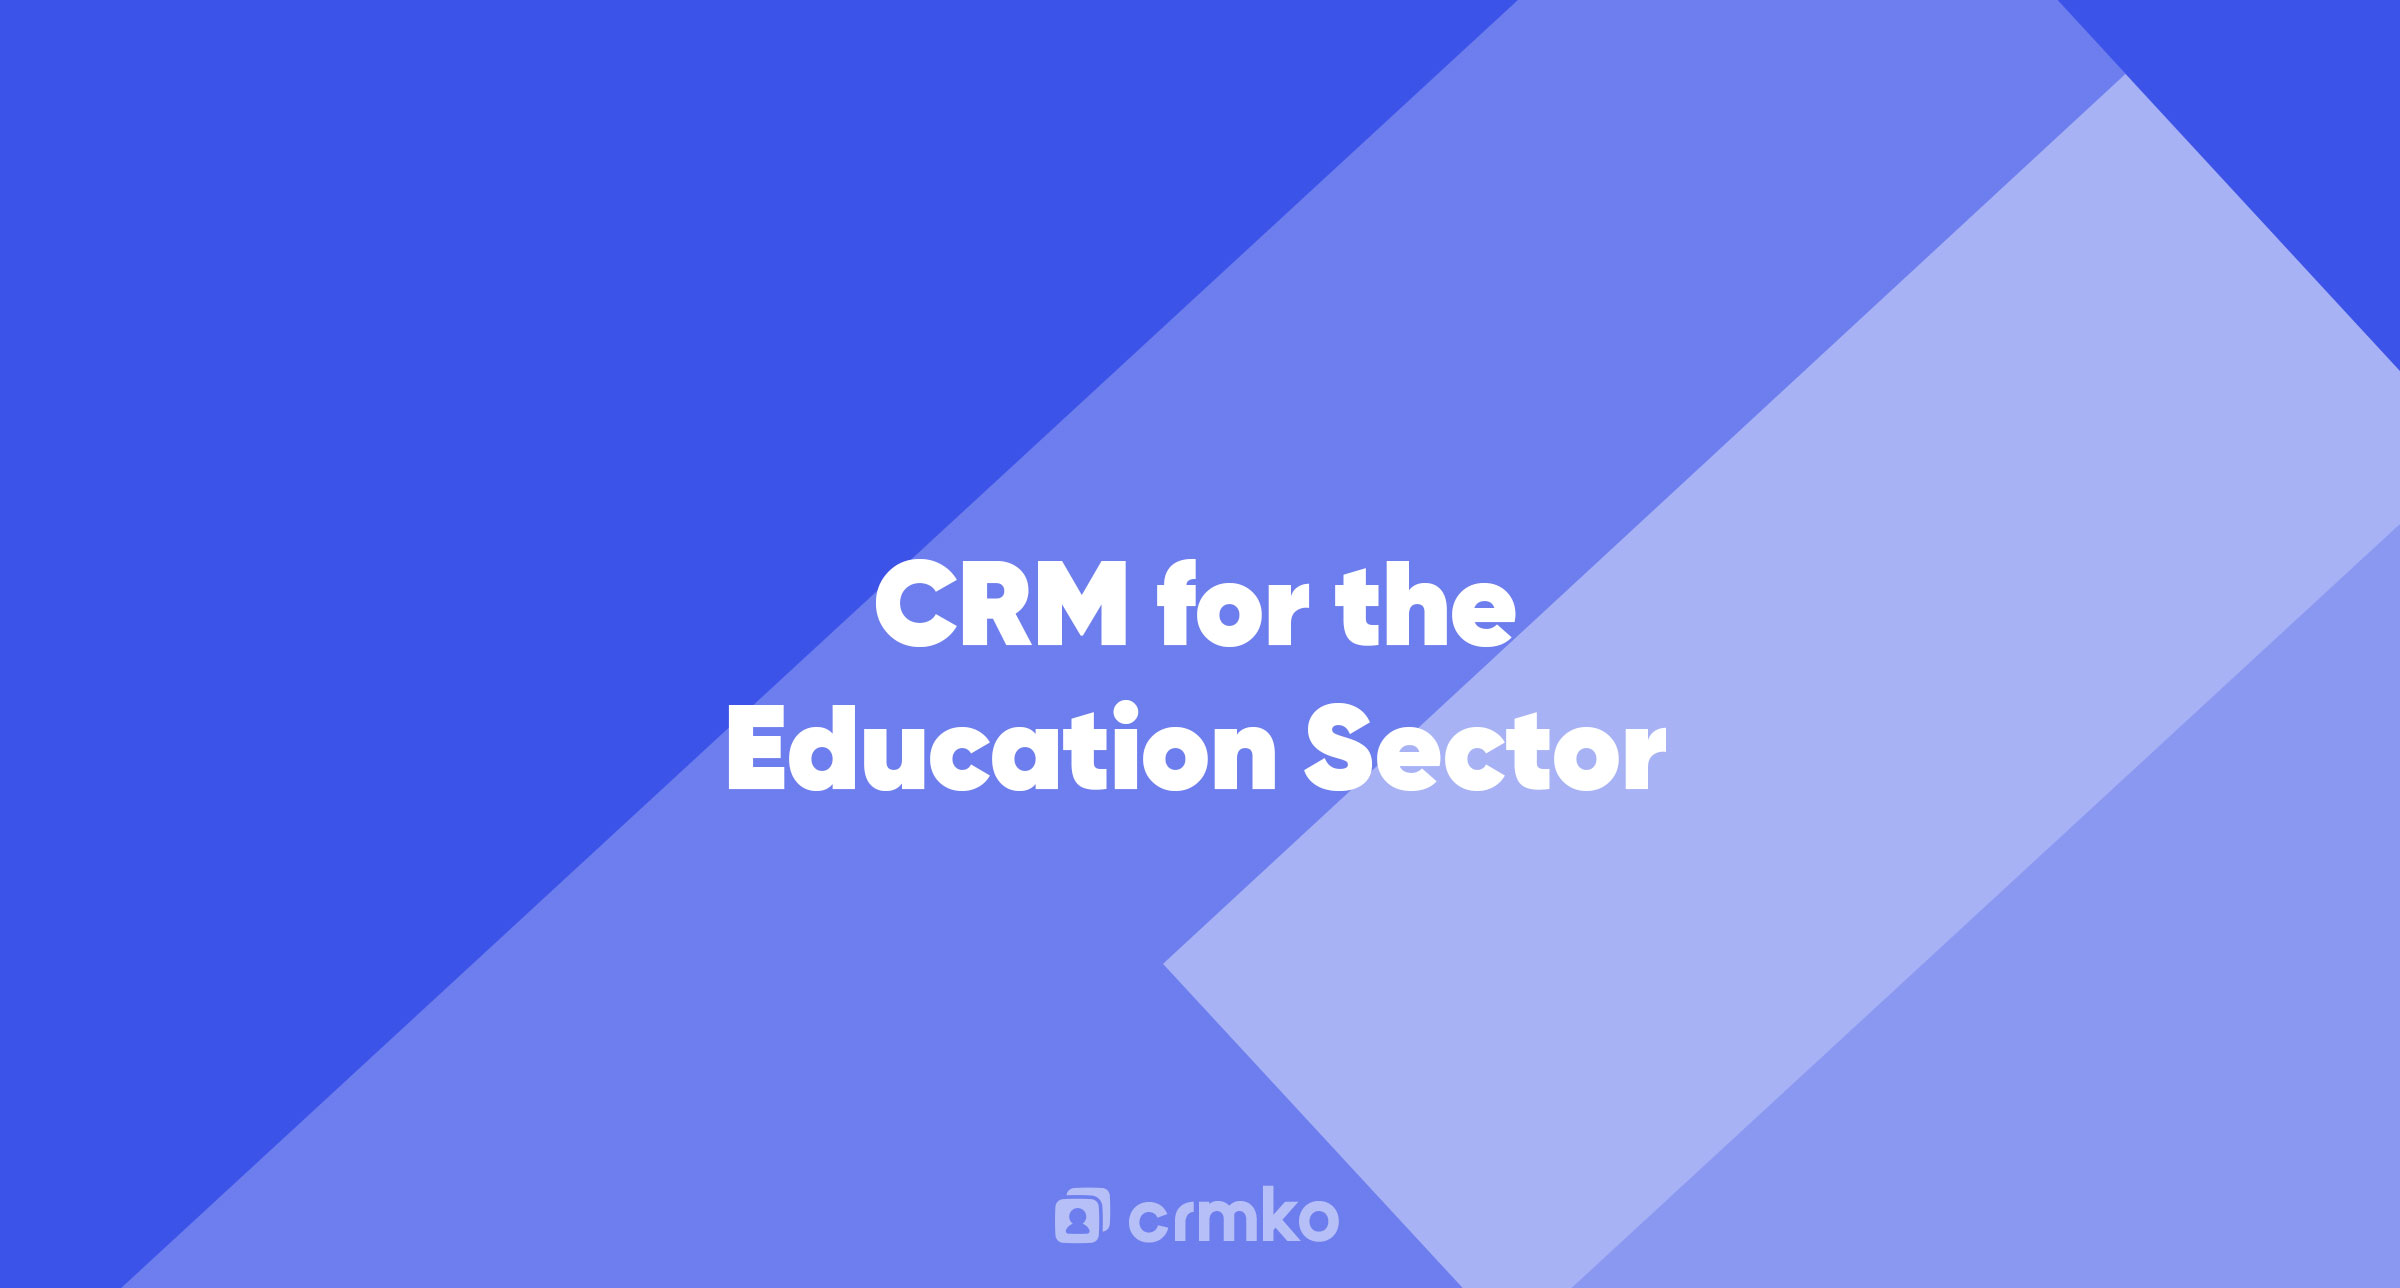 Article | CRM for the Education Sector